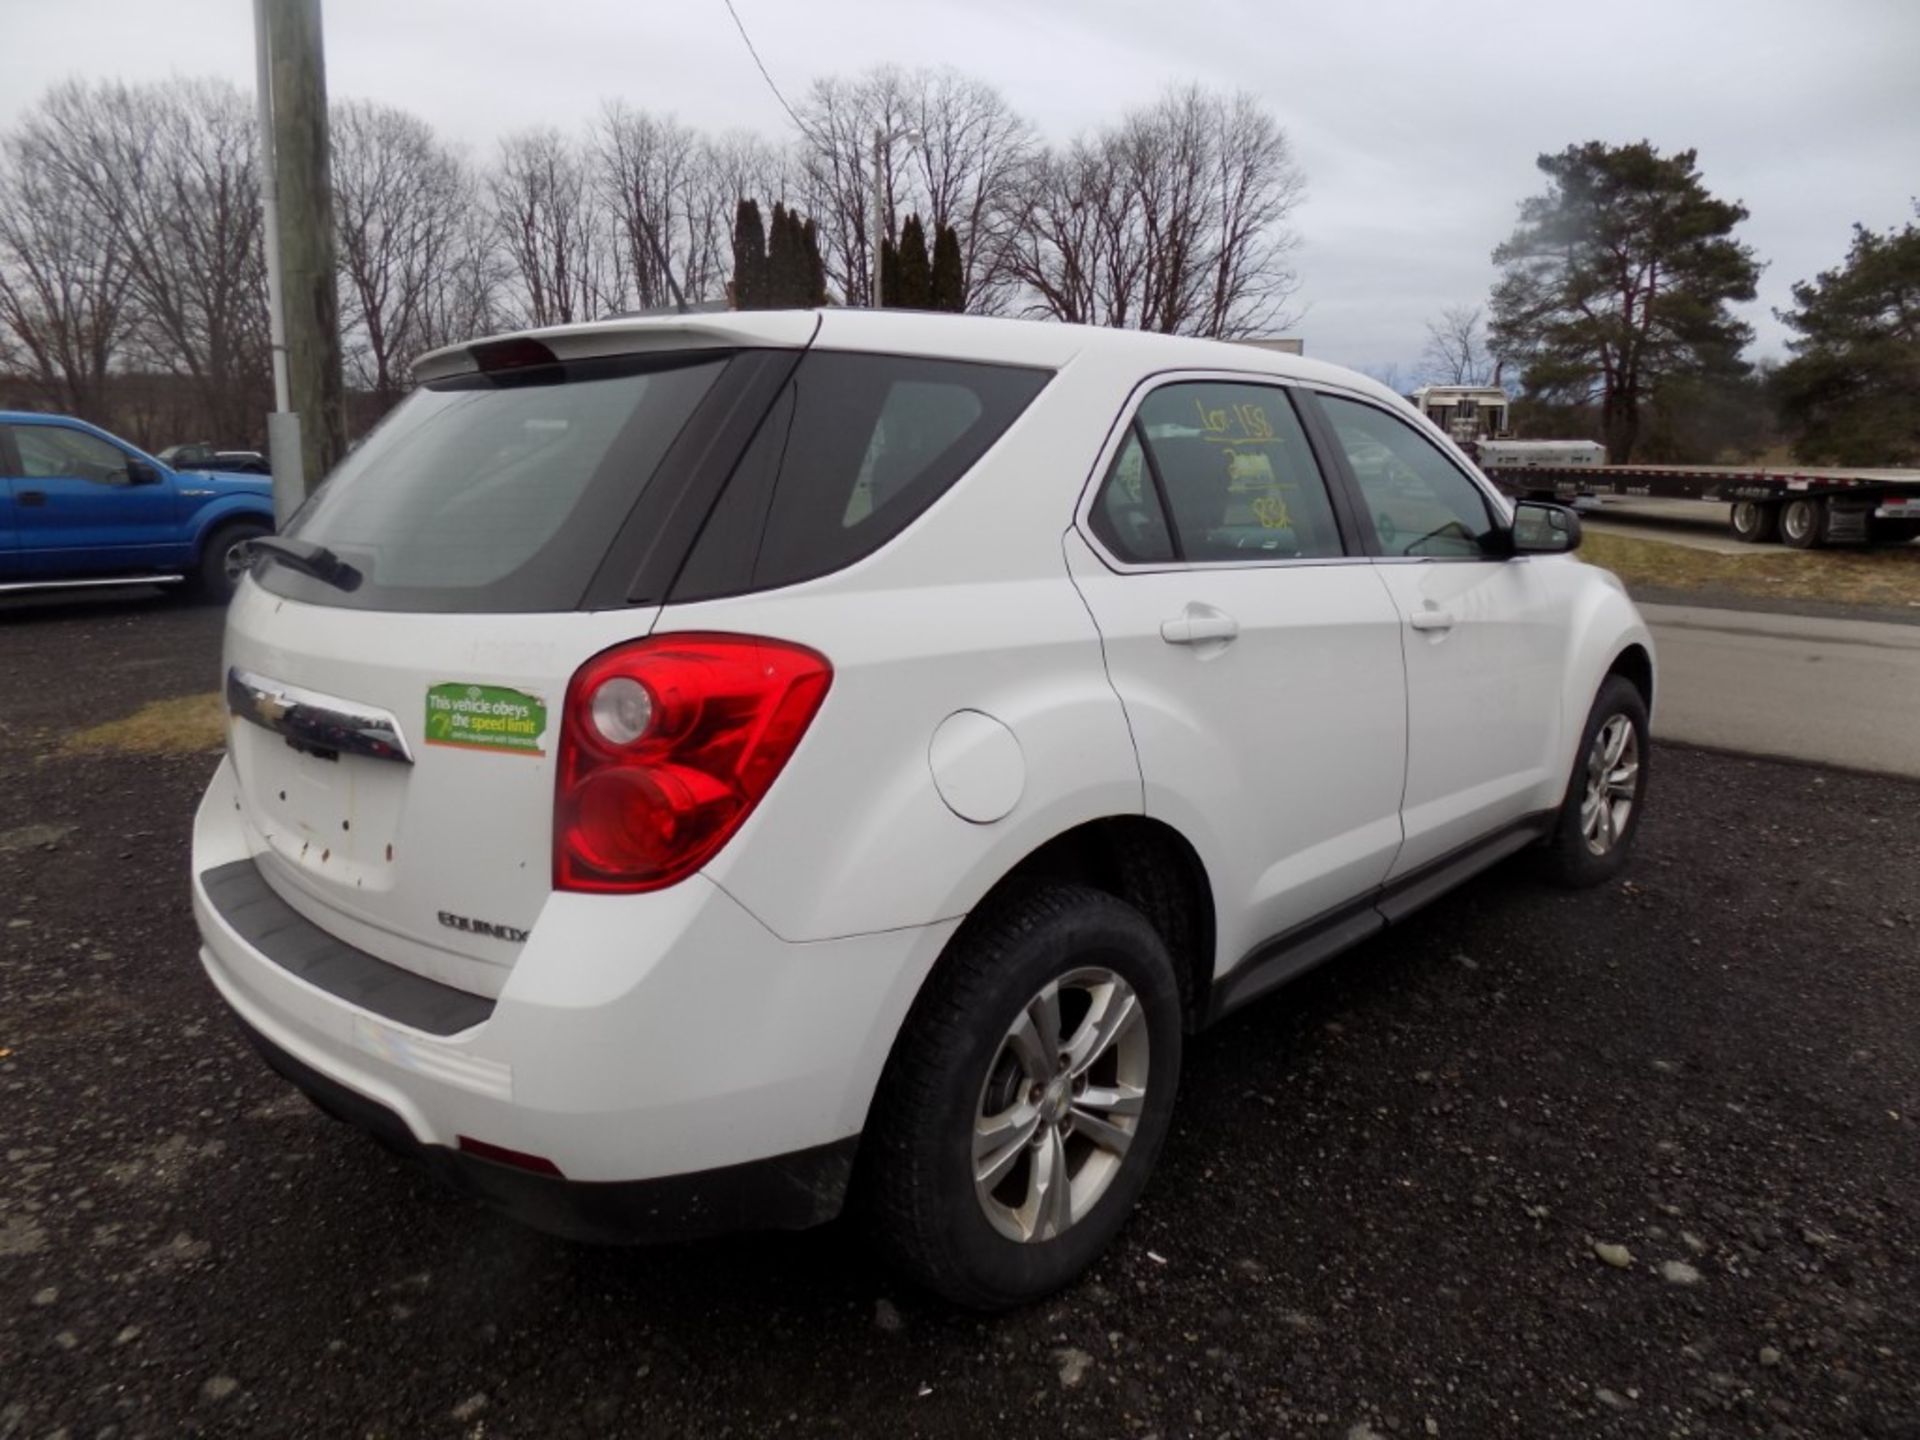 2014 Chevrolet Equinox LS, AWD, White, 83,836 Mi, Vin# 2GNFLEEK9E6247189 - OPEN TO ALL BUYERS, DECAL - Image 4 of 9